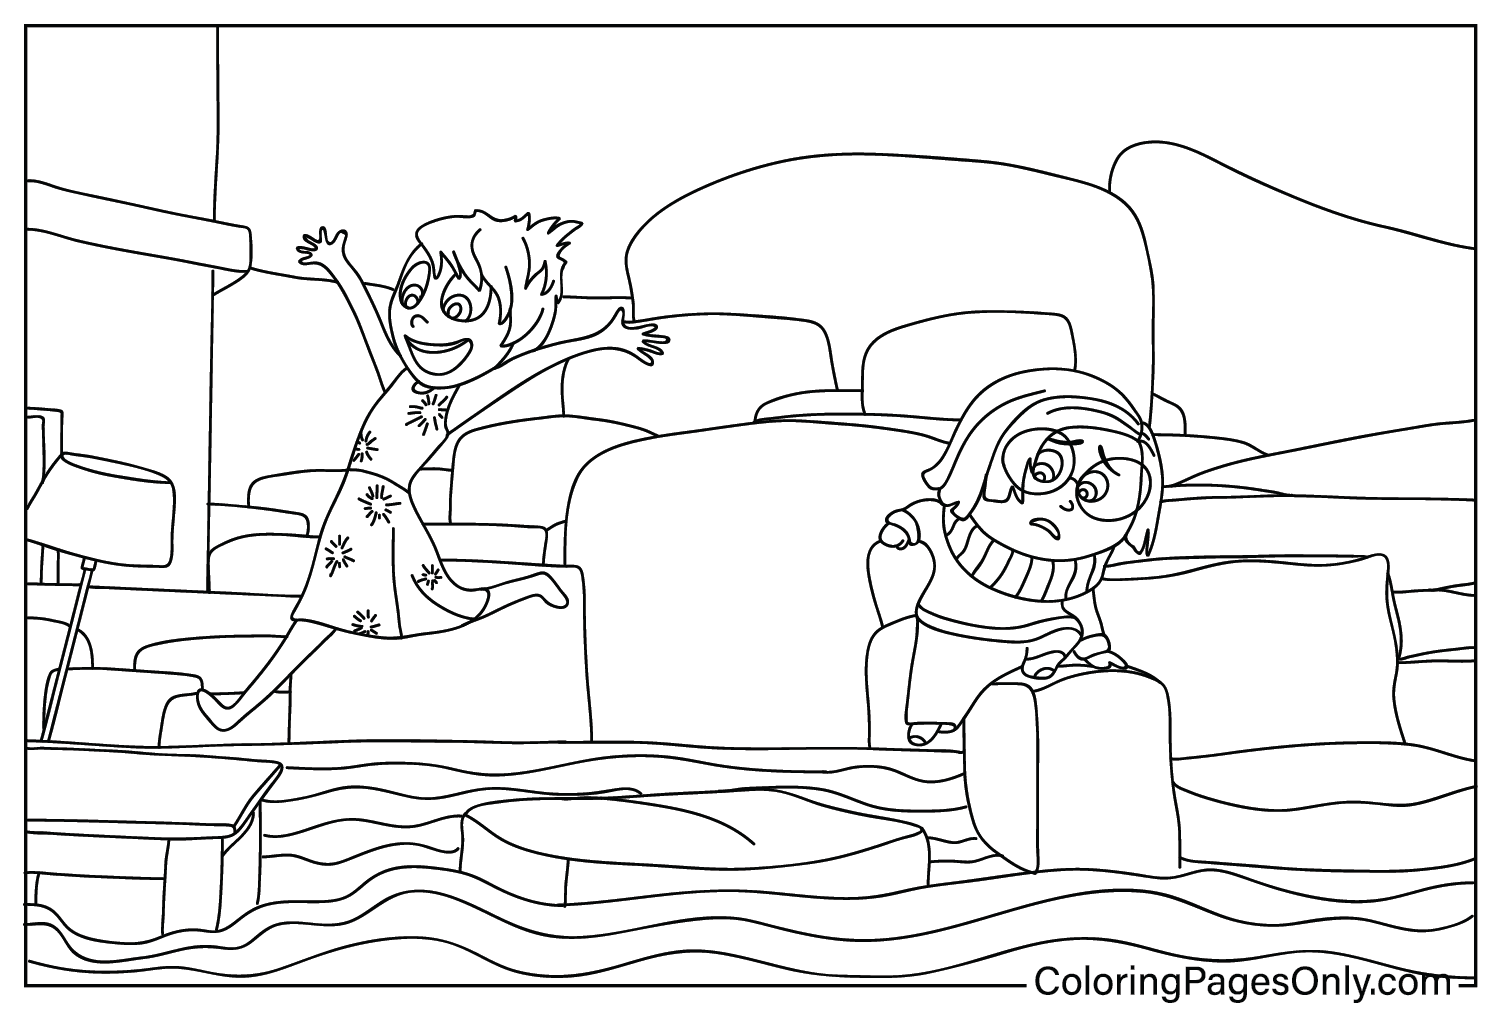 Joy and Sadness Coloring Page from Inside Out 2